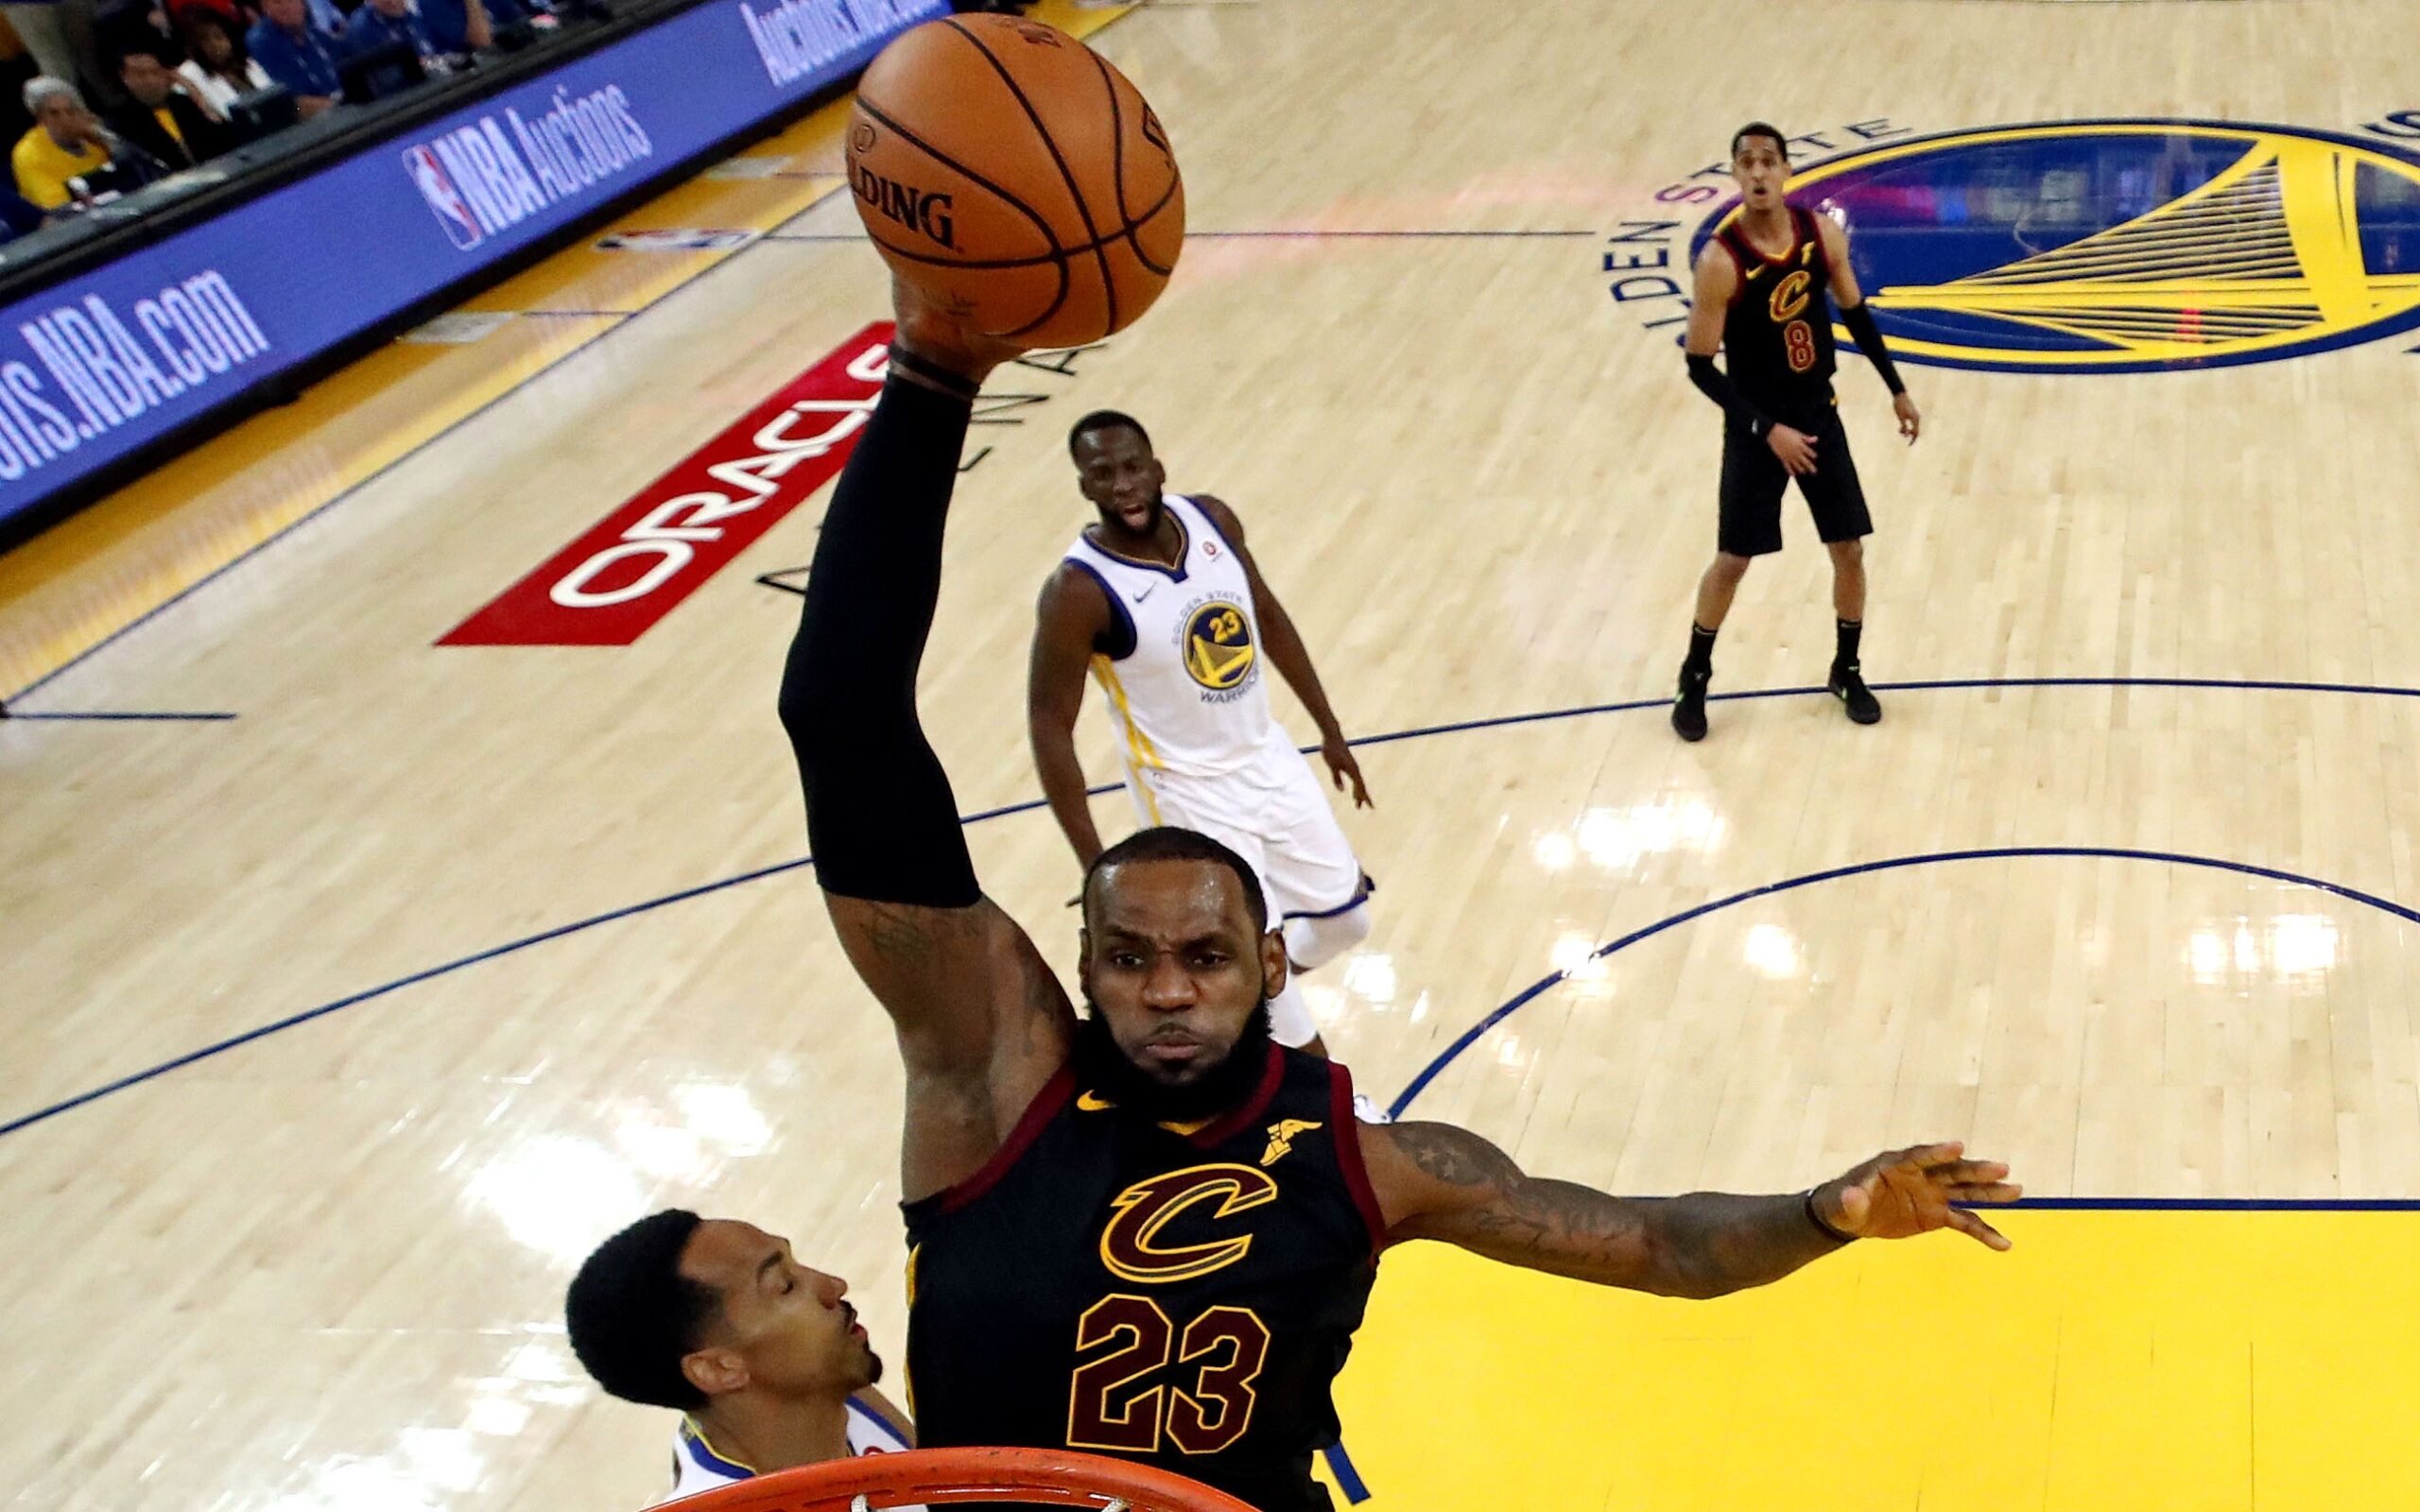 Cavs complete long climb back to NBA playoffs without LeBron